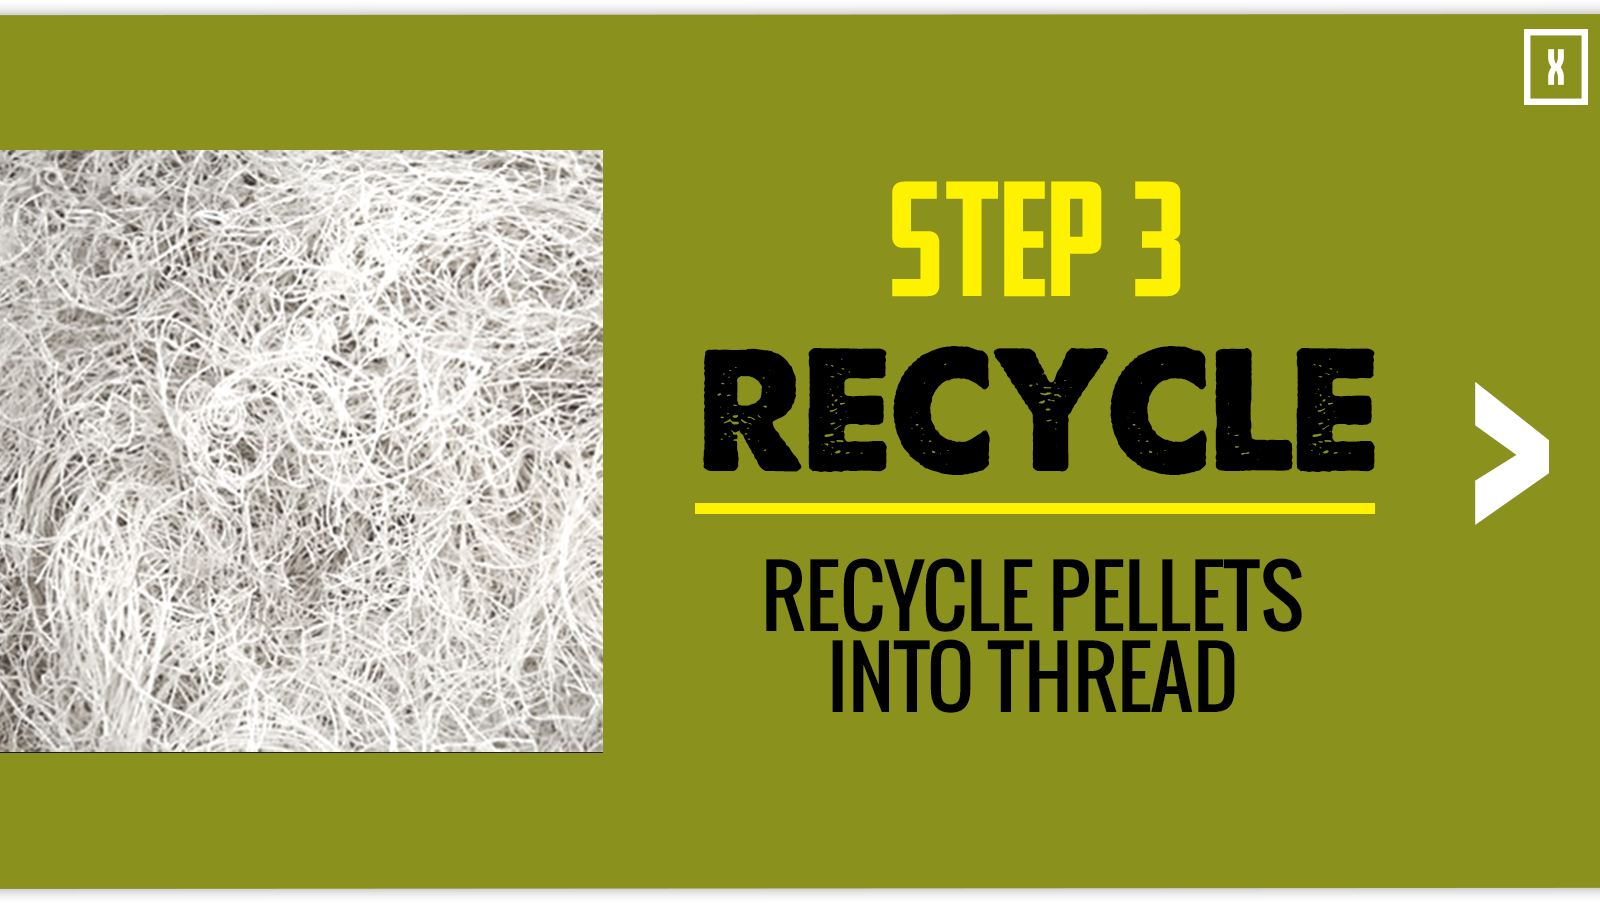 Step 3: Recycle pellets into thread